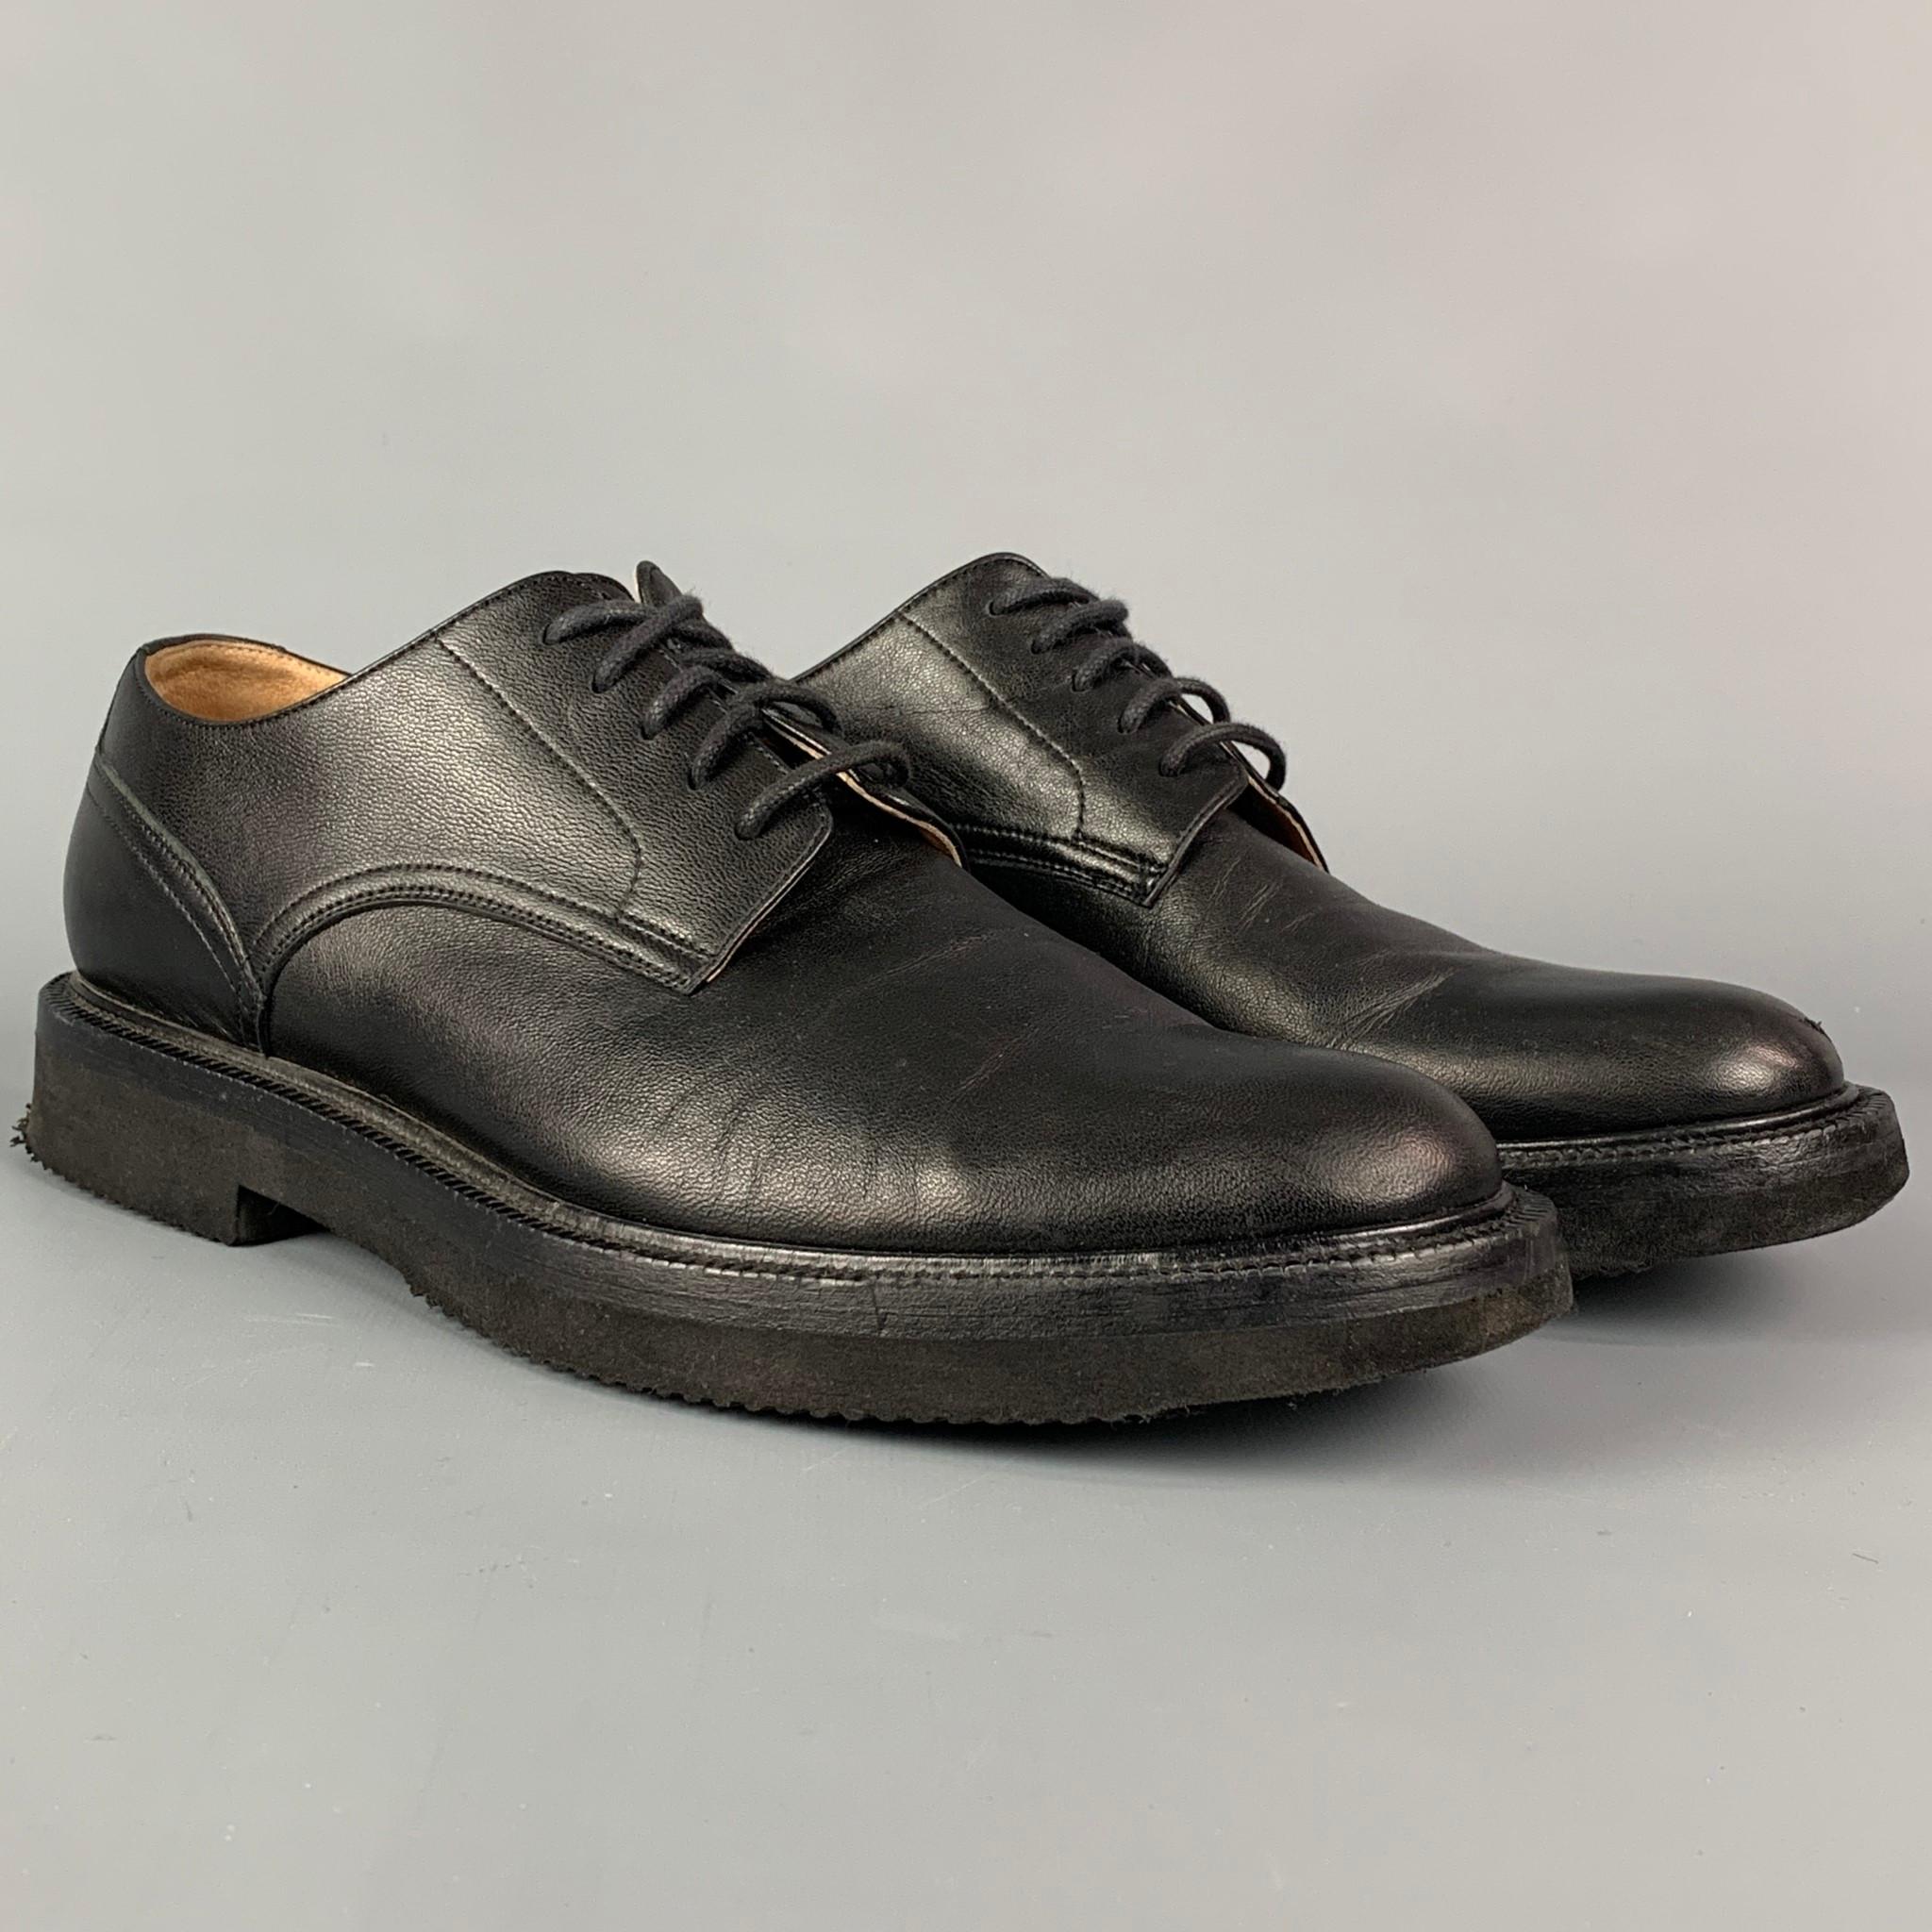 DRIES VAN NOTEN shoes comes in a black leather featuring a derby style and a lace up style. Made in Italy. 

Very Good Pre-Owned Condition.
Marked: 20297 38.5
Original Retail Price: $835.00

Outsole: 11.5 in. x 4.25 in. 